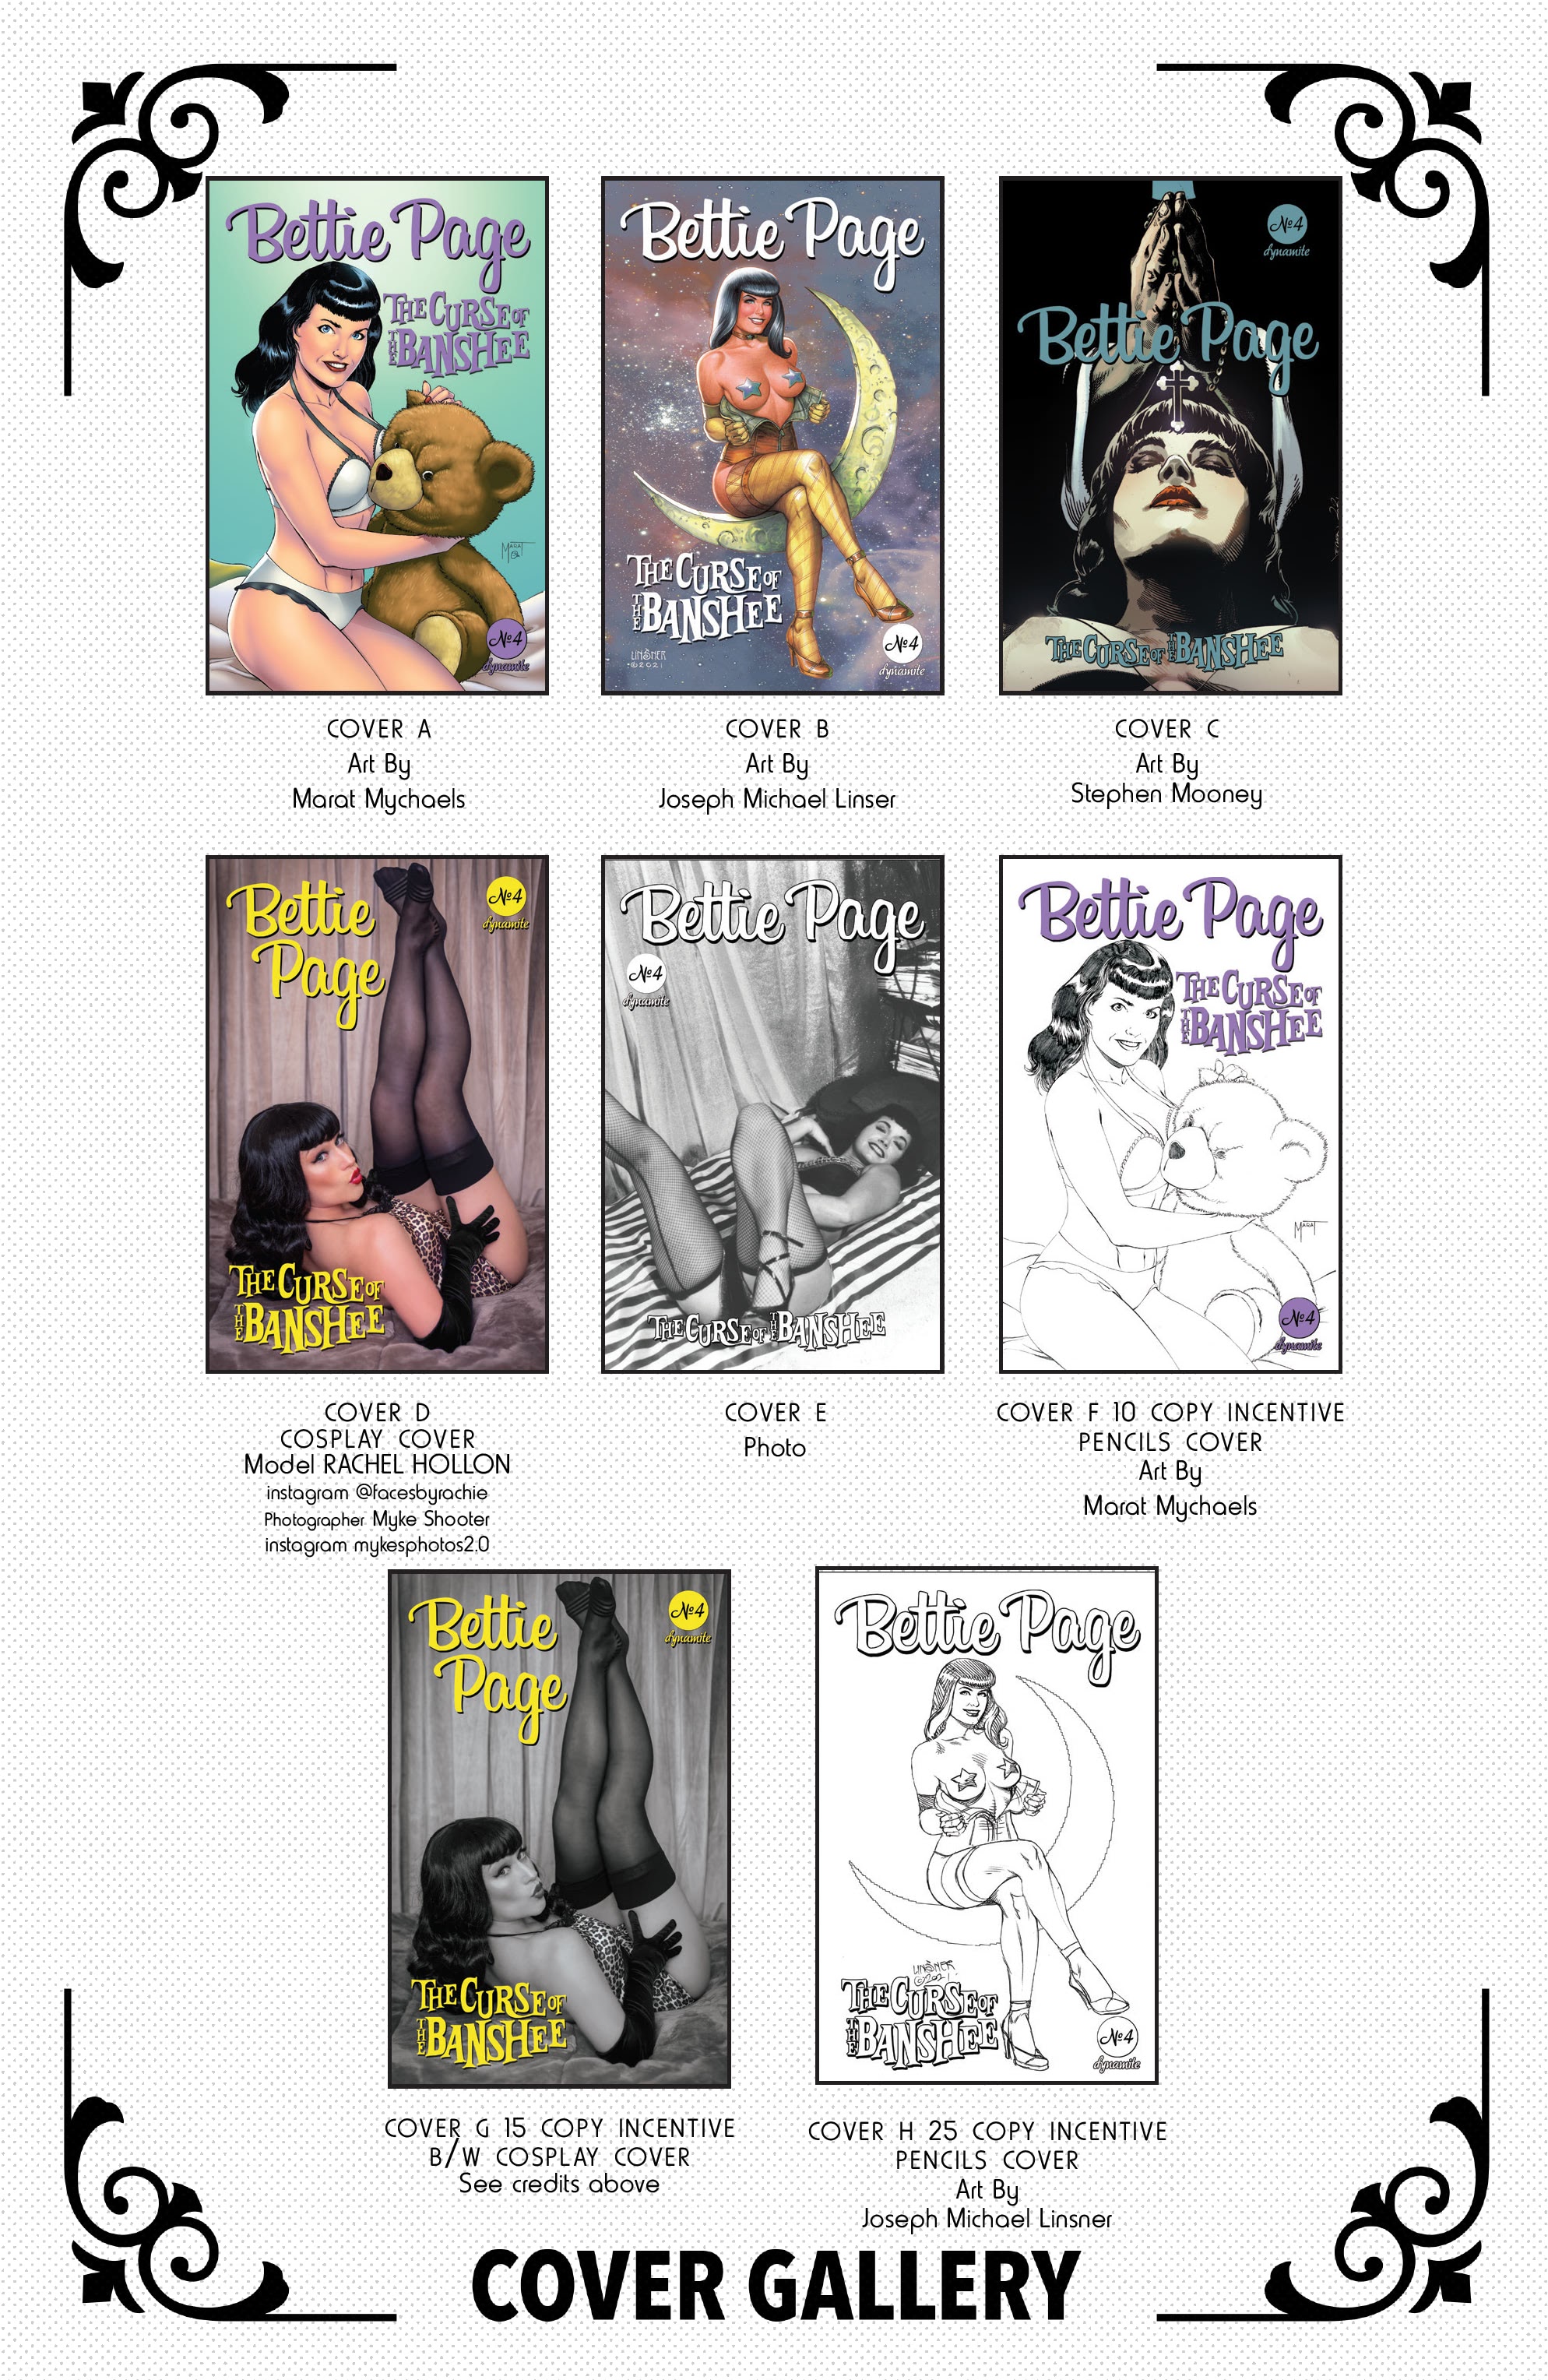 Read online Bettie Page & The Curse of the Banshee comic -  Issue #4 - 28